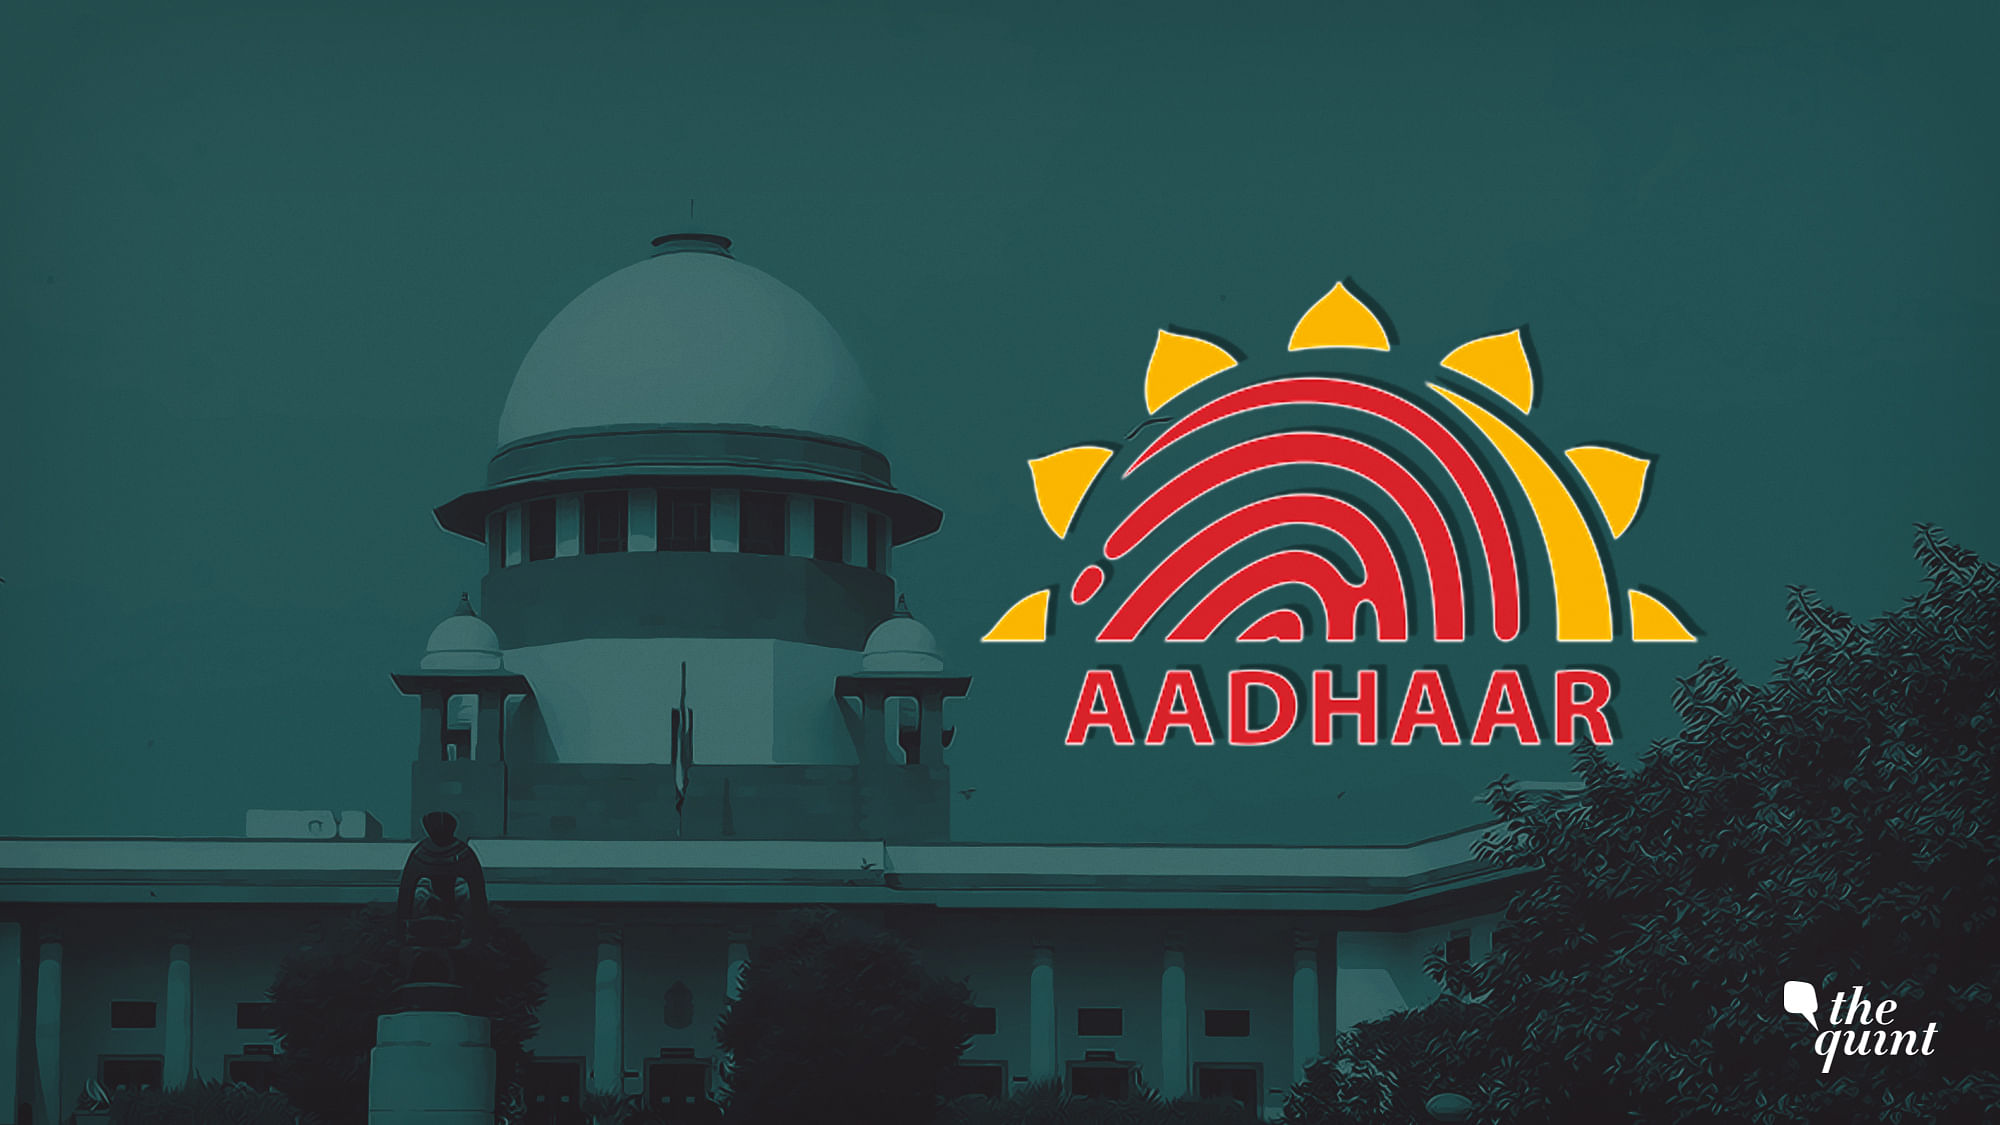 The constitutional validity of Aadhaar has been upheld by the Supreme Court of India on Wednesday, 26 September.